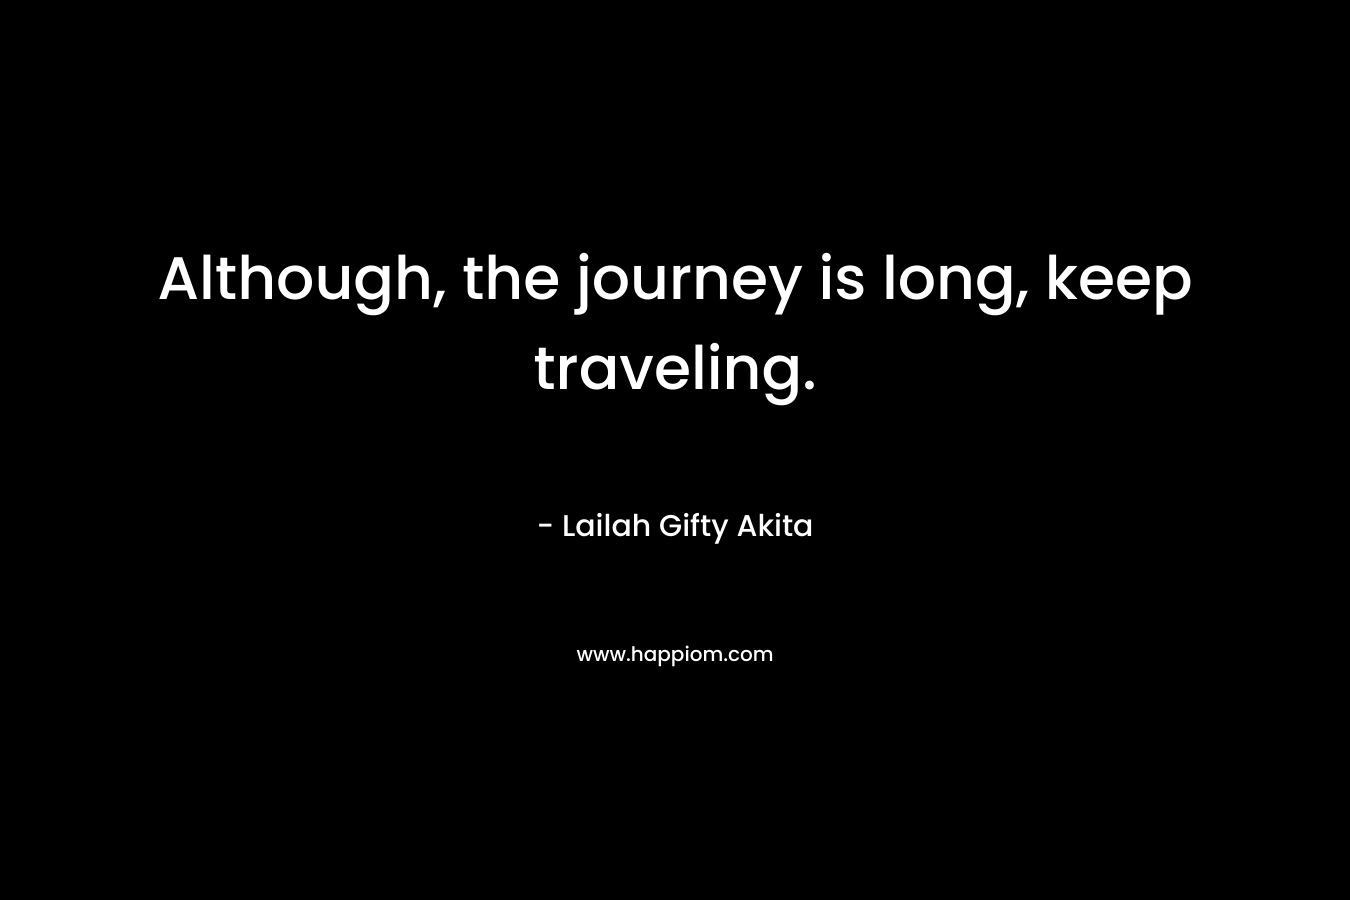 Although, the journey is long, keep traveling.